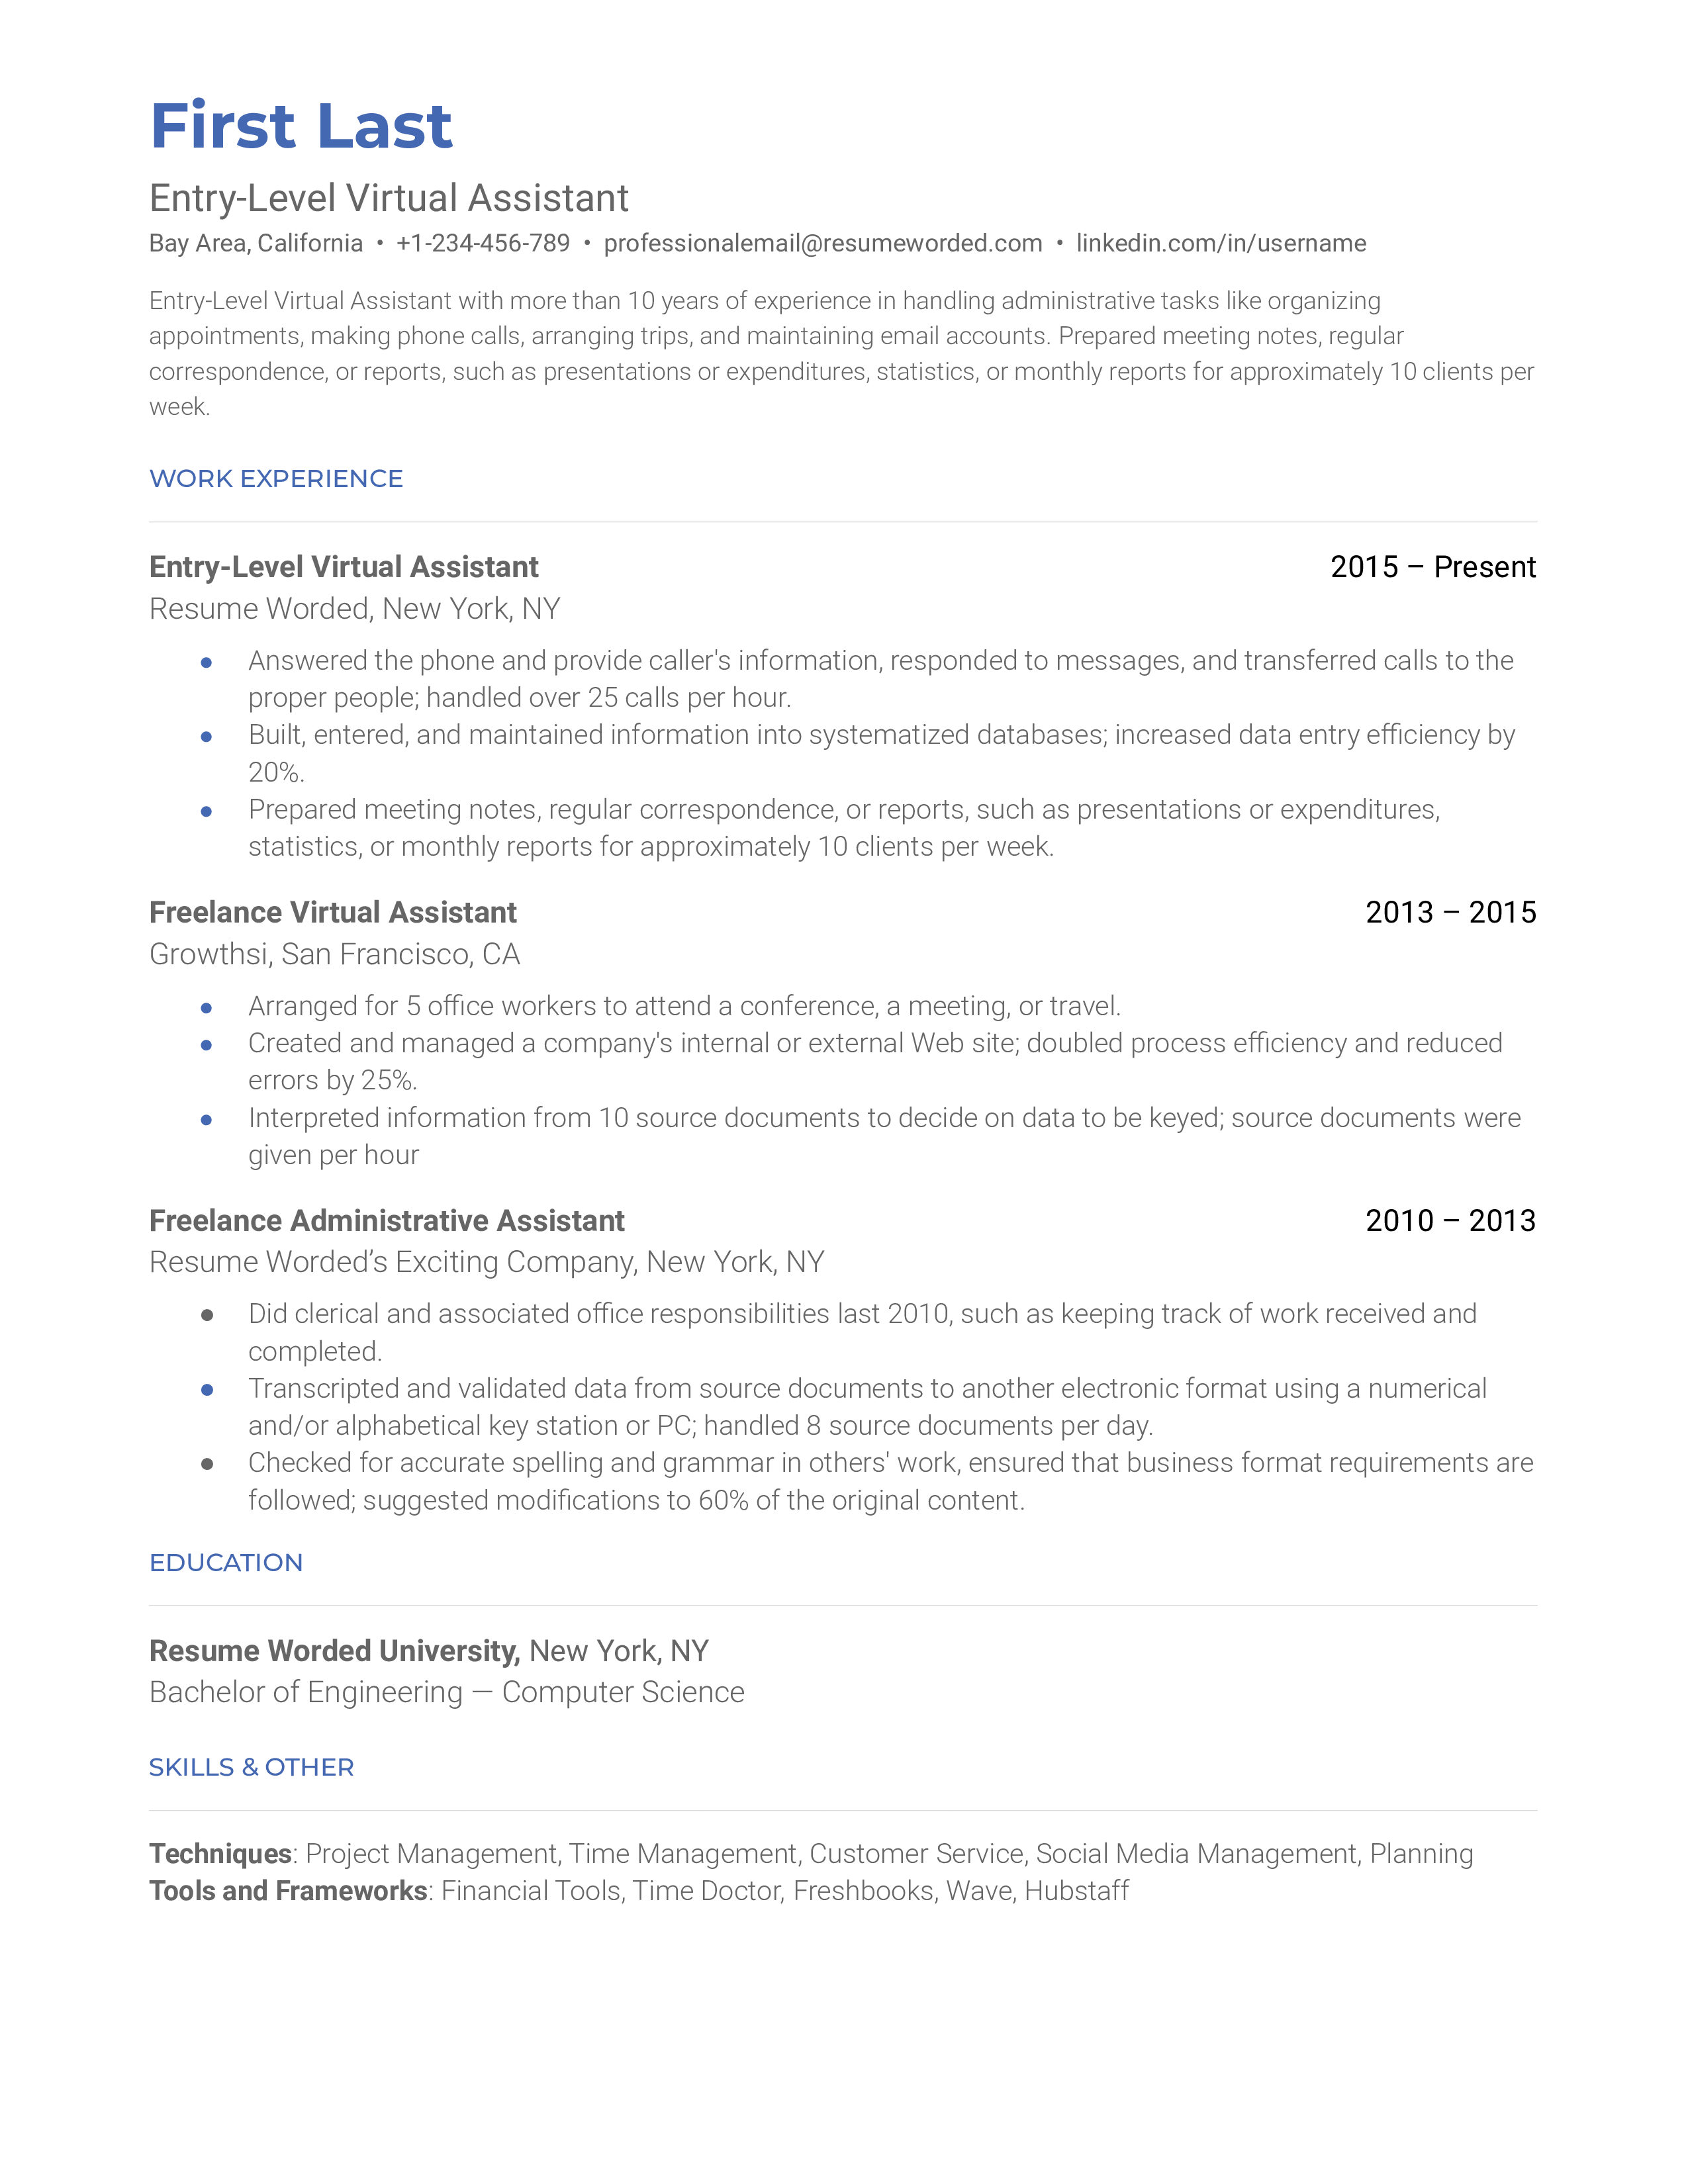 Entry-Level Virtual Assistant Resume Sample